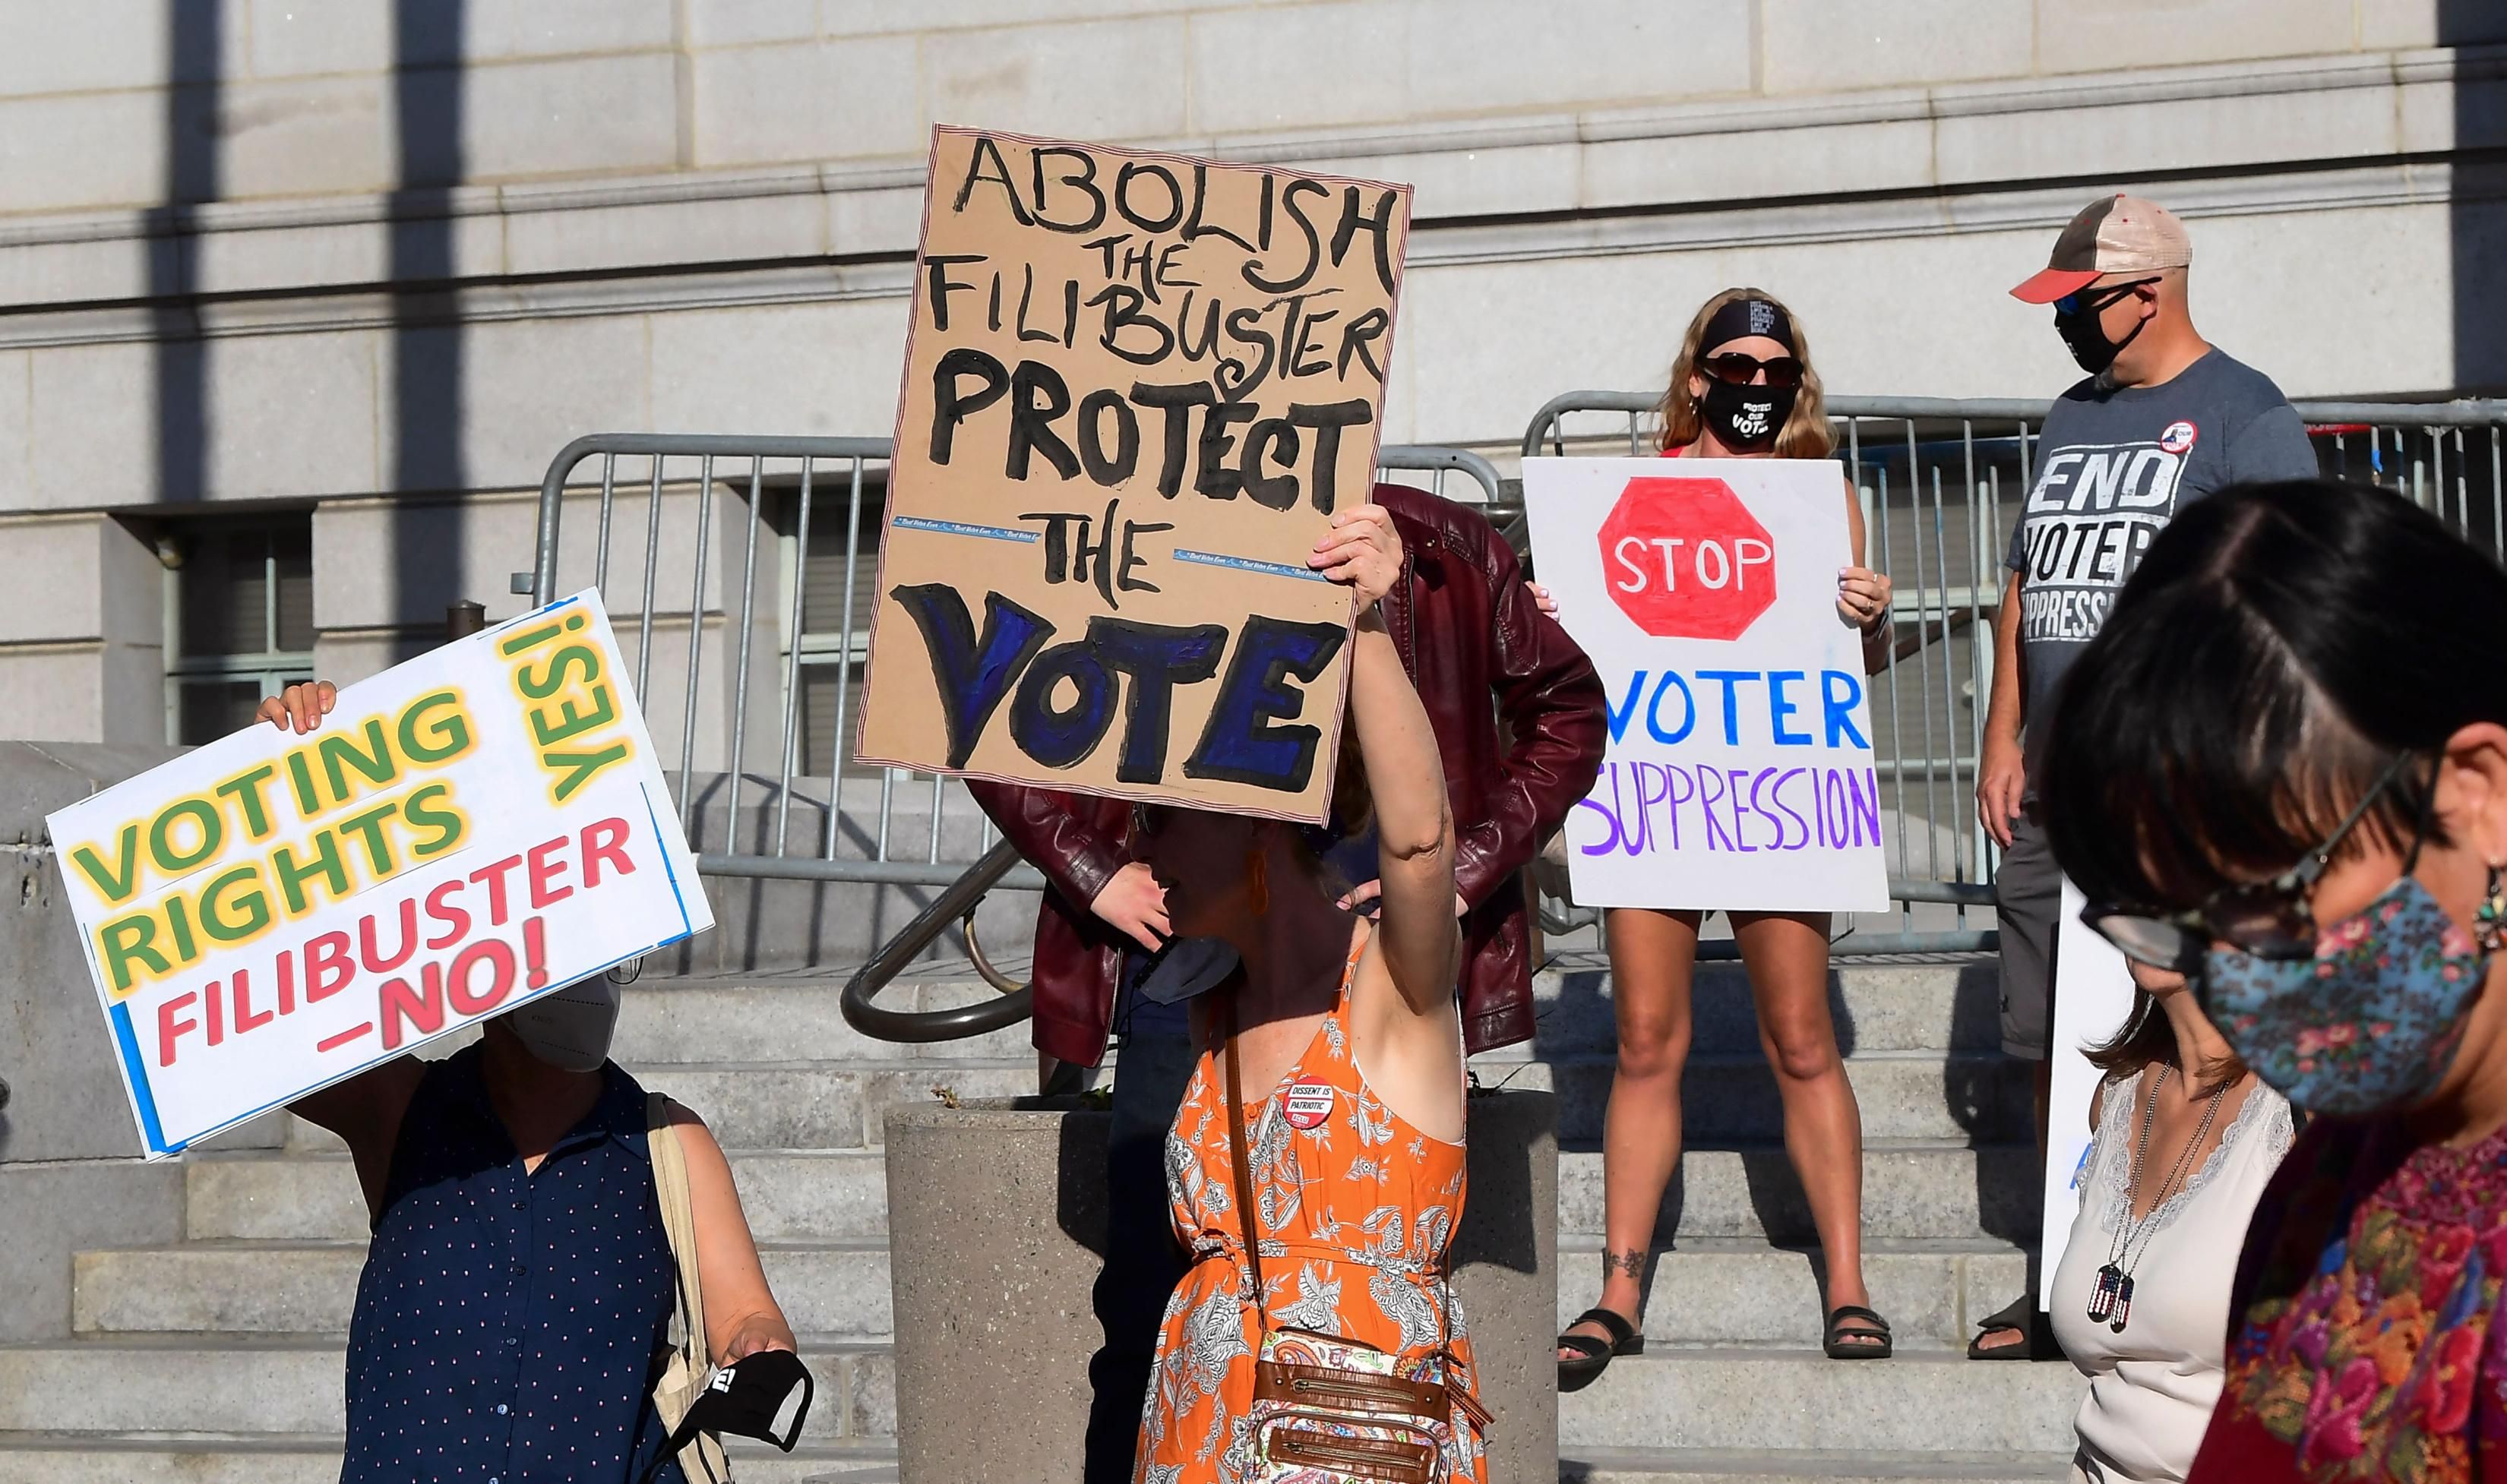 Activists from various grassroots organizations rally outside City Hall in Los Angeles on July 7, 2021, calling on Sen. Dianne Feinstein (D-Calif.) and other senators to remove the filibuster and pass the "For the People Act" to expand voting rights. (Photo: Frederic J. Brown/AFP via Getty Images)